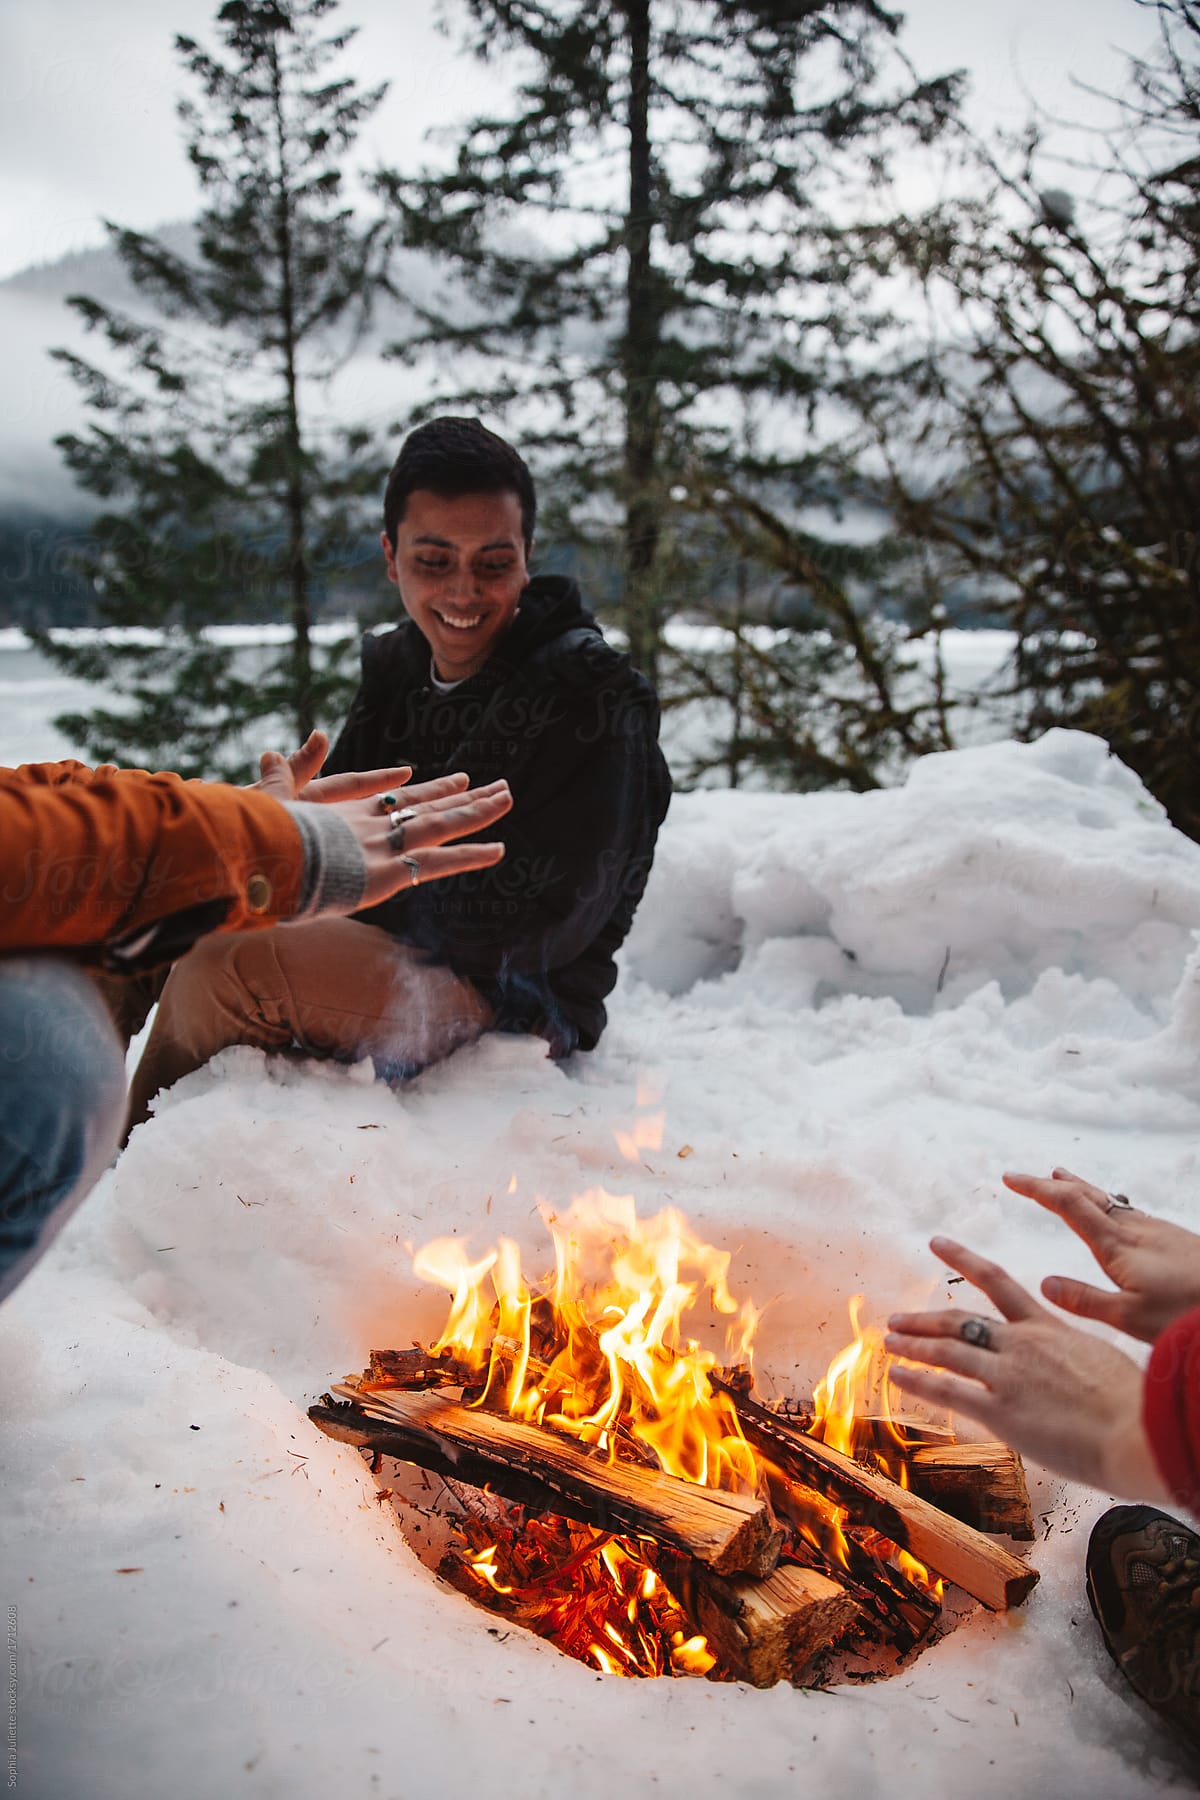 Friends Sitting Around a Warm Fire in the Snow